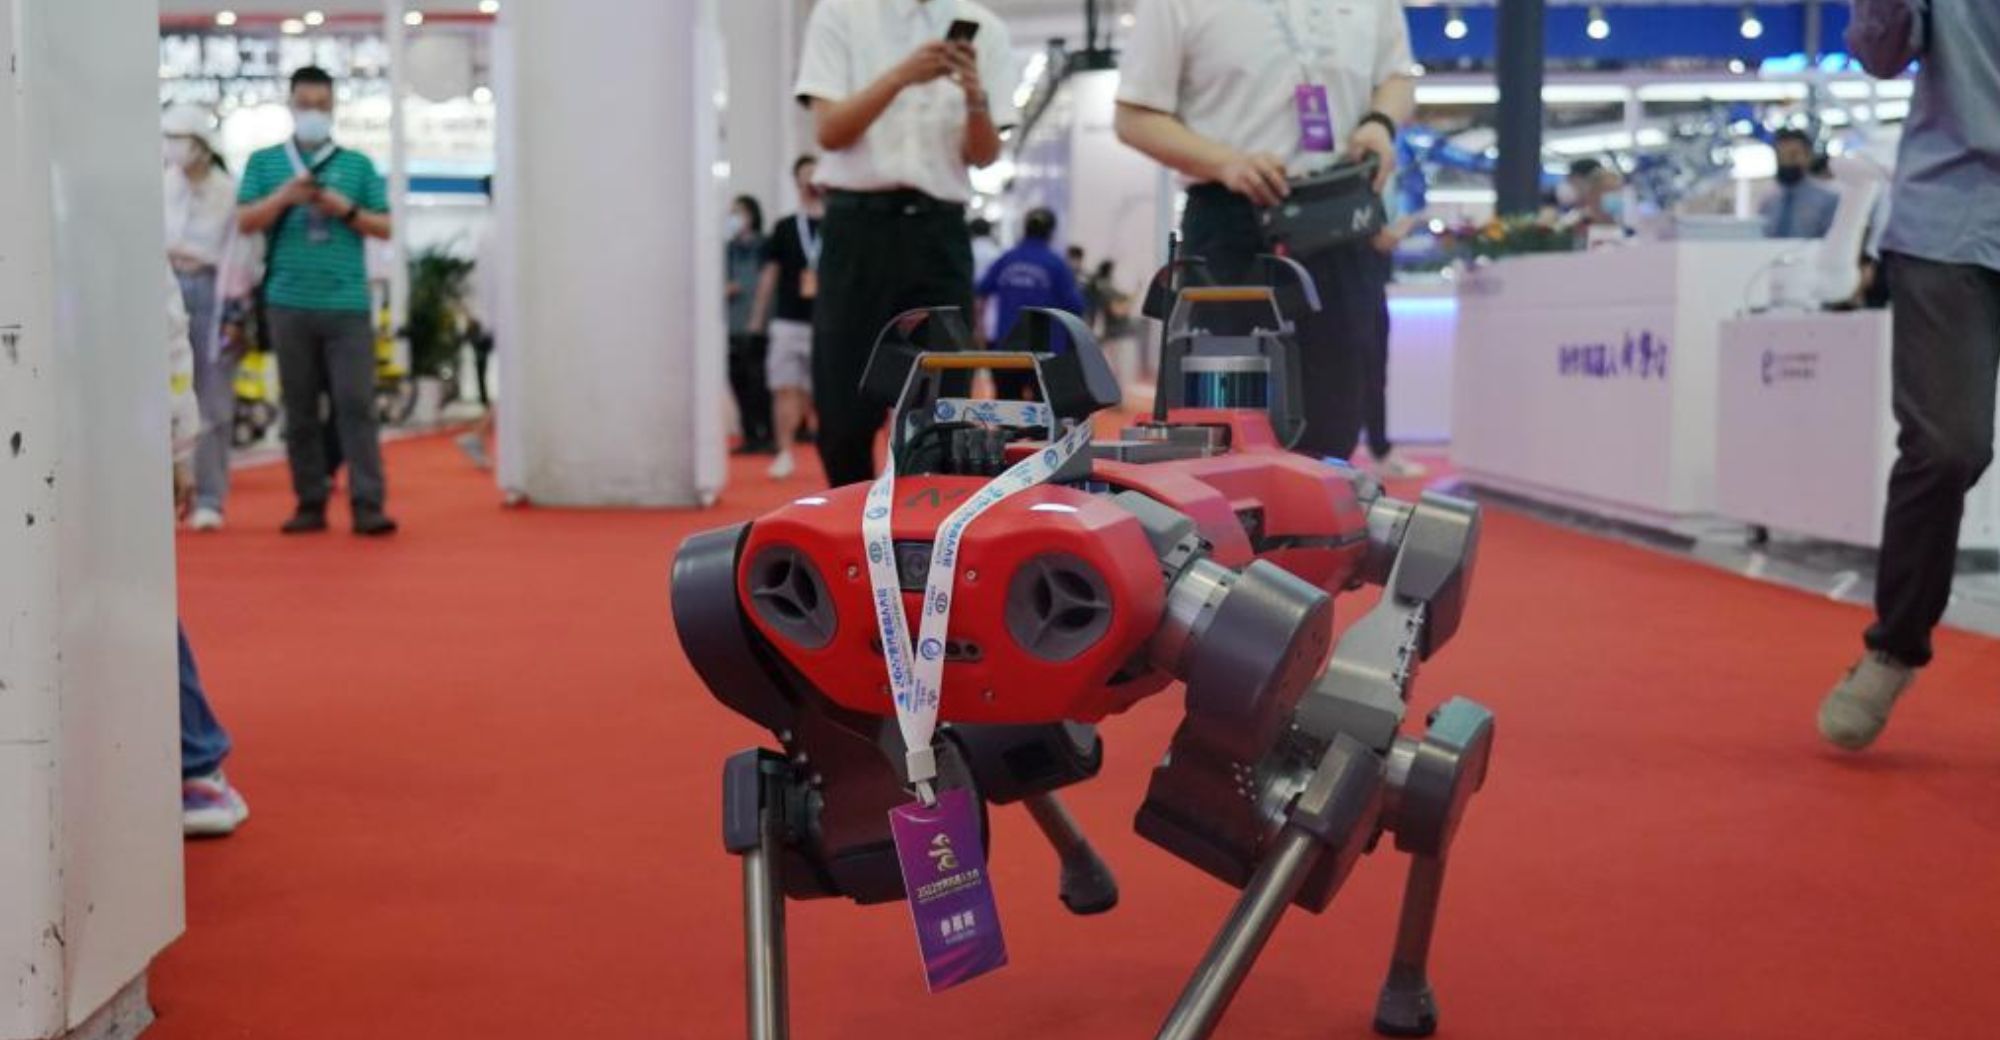 Chinese Robot Industry Saw H1 Financing of Over 5B Yuan